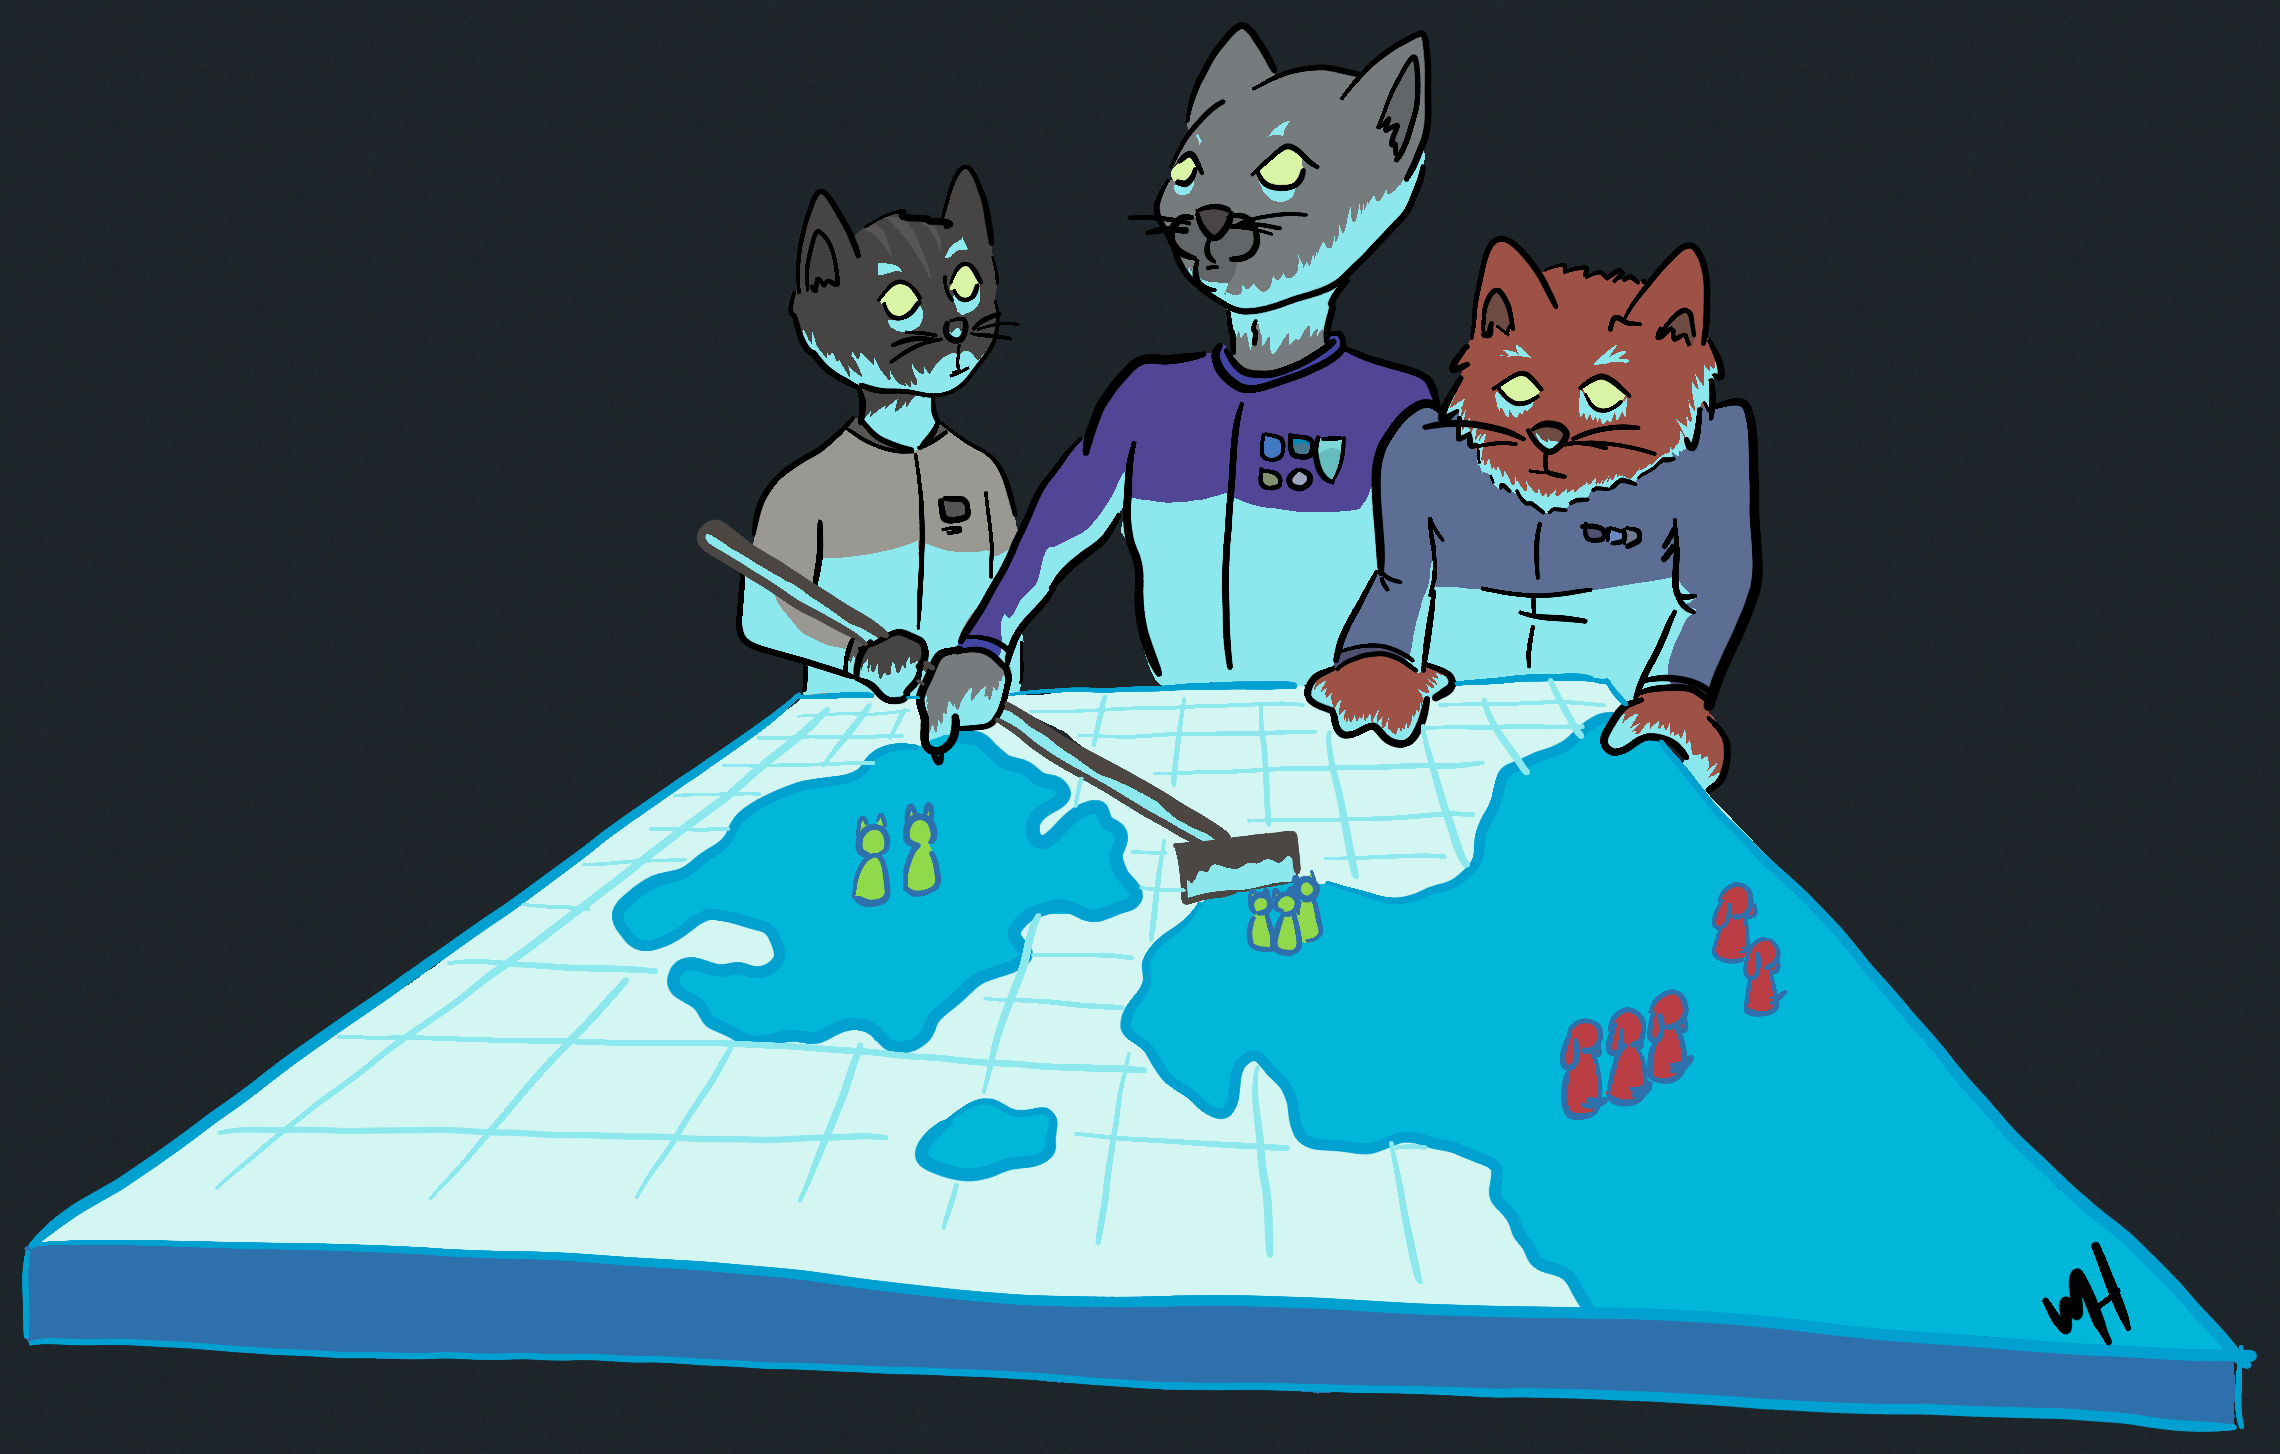 Inktober prompt number 5. Three cats hunched over an illuminated map they're using to decide what to do next.